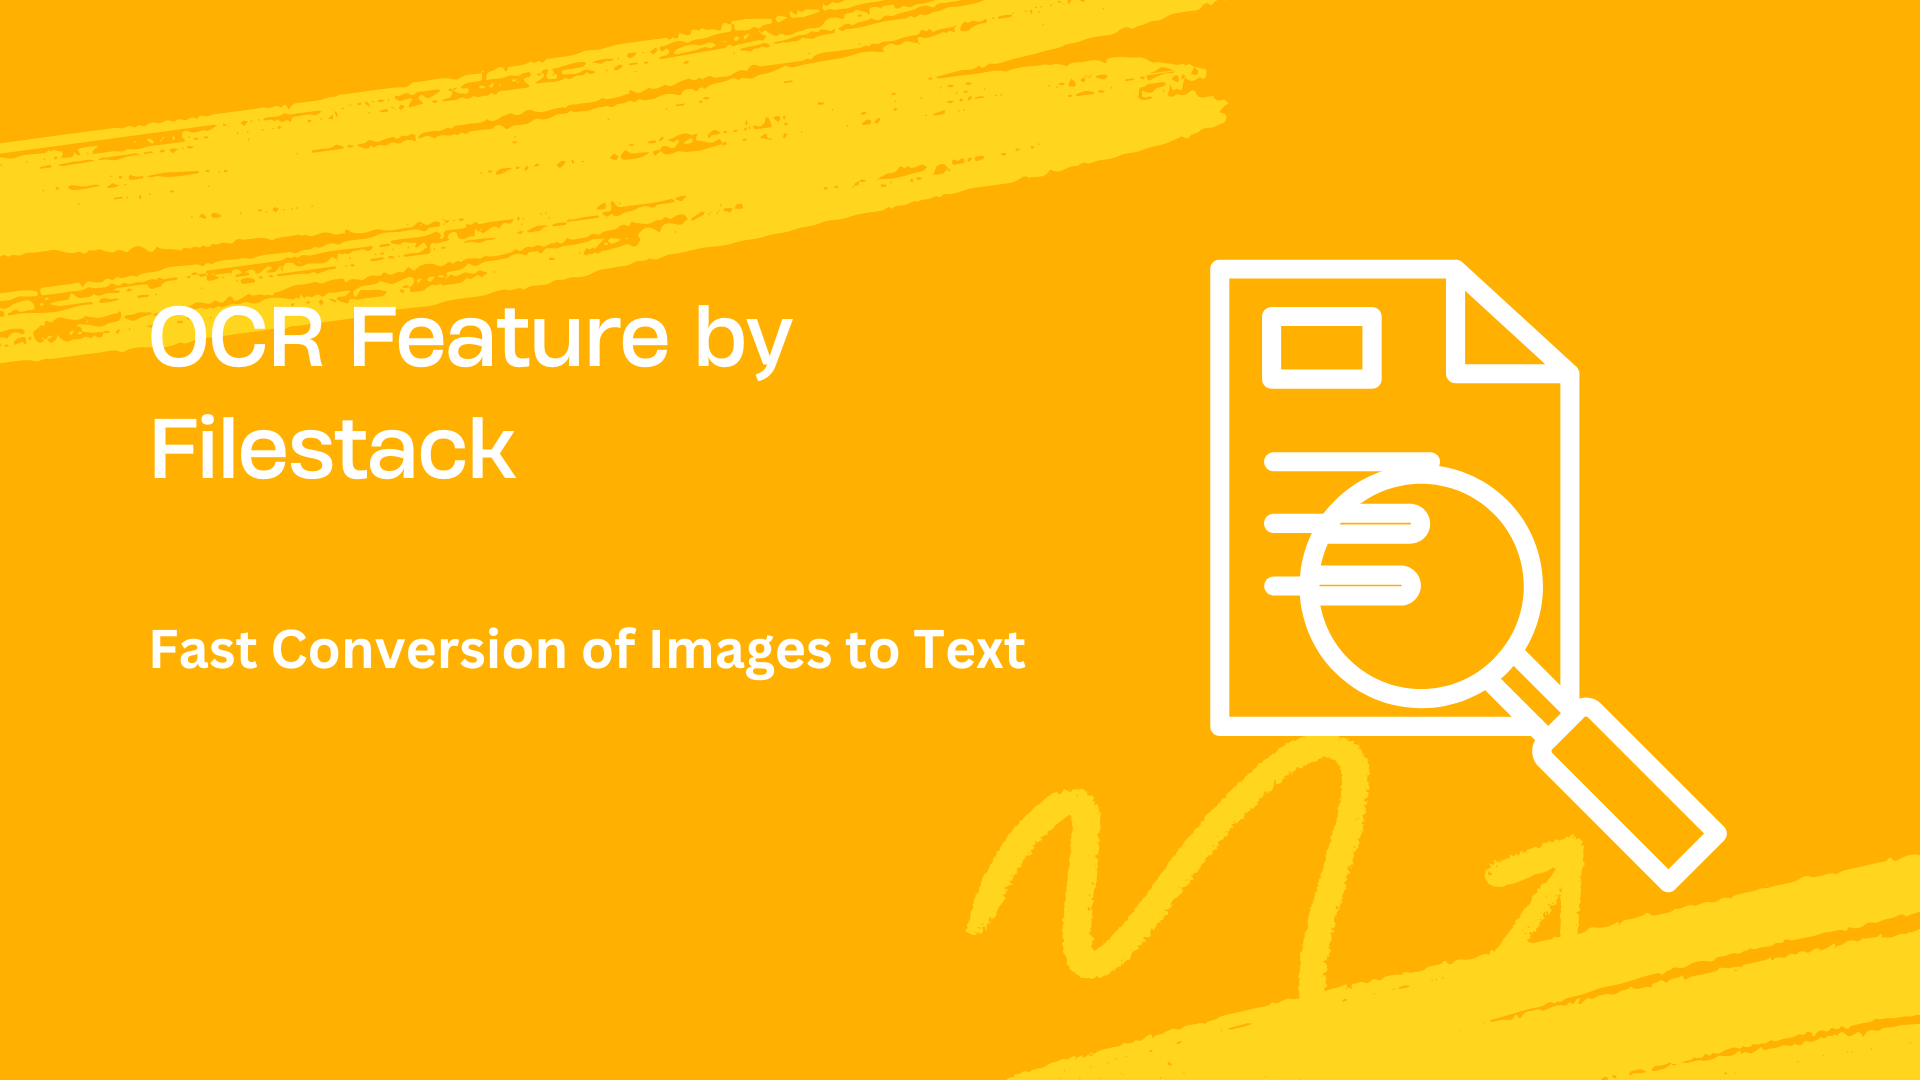 Filestack OCR Feature - Fast Conversion of Images to Text